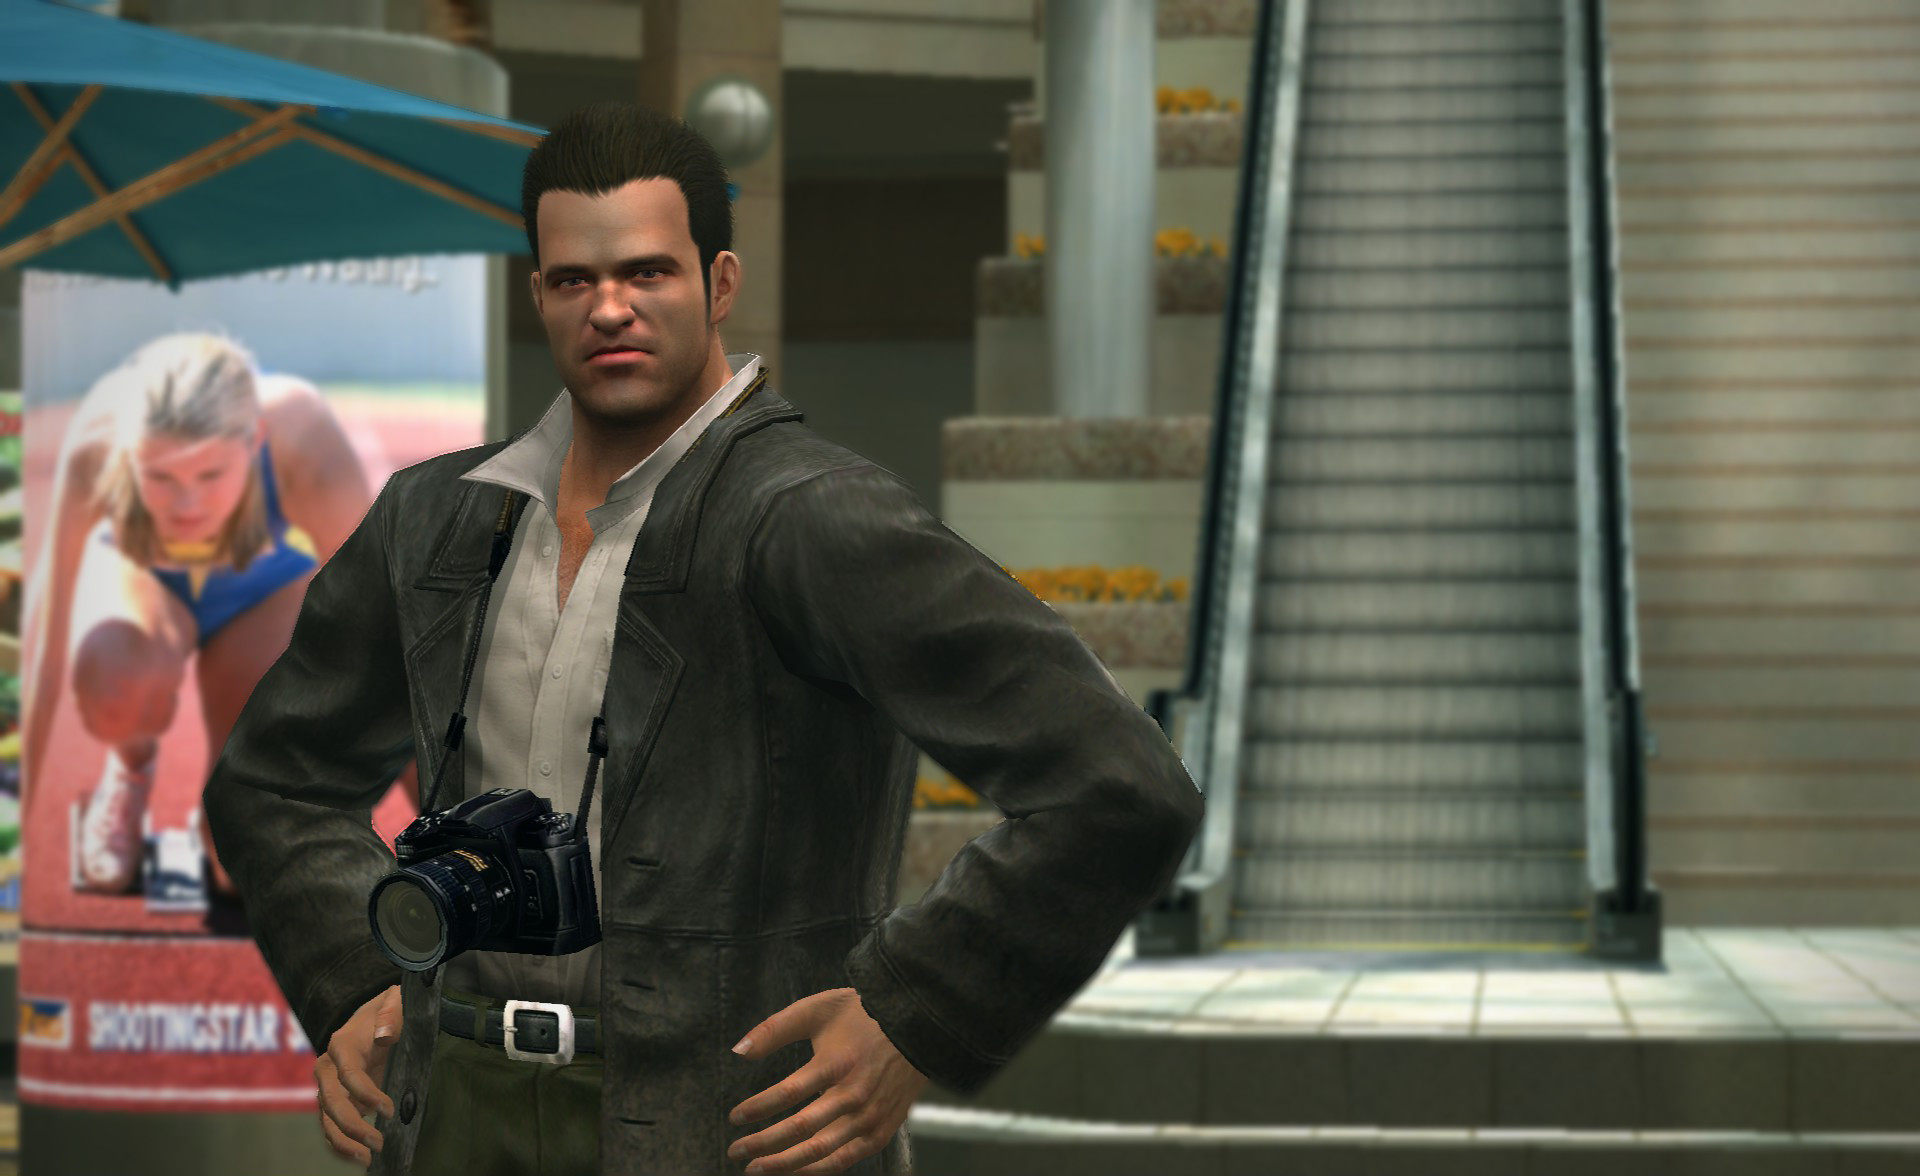 Save 70% on DEAD RISING (5,99€) : r/steamdeals